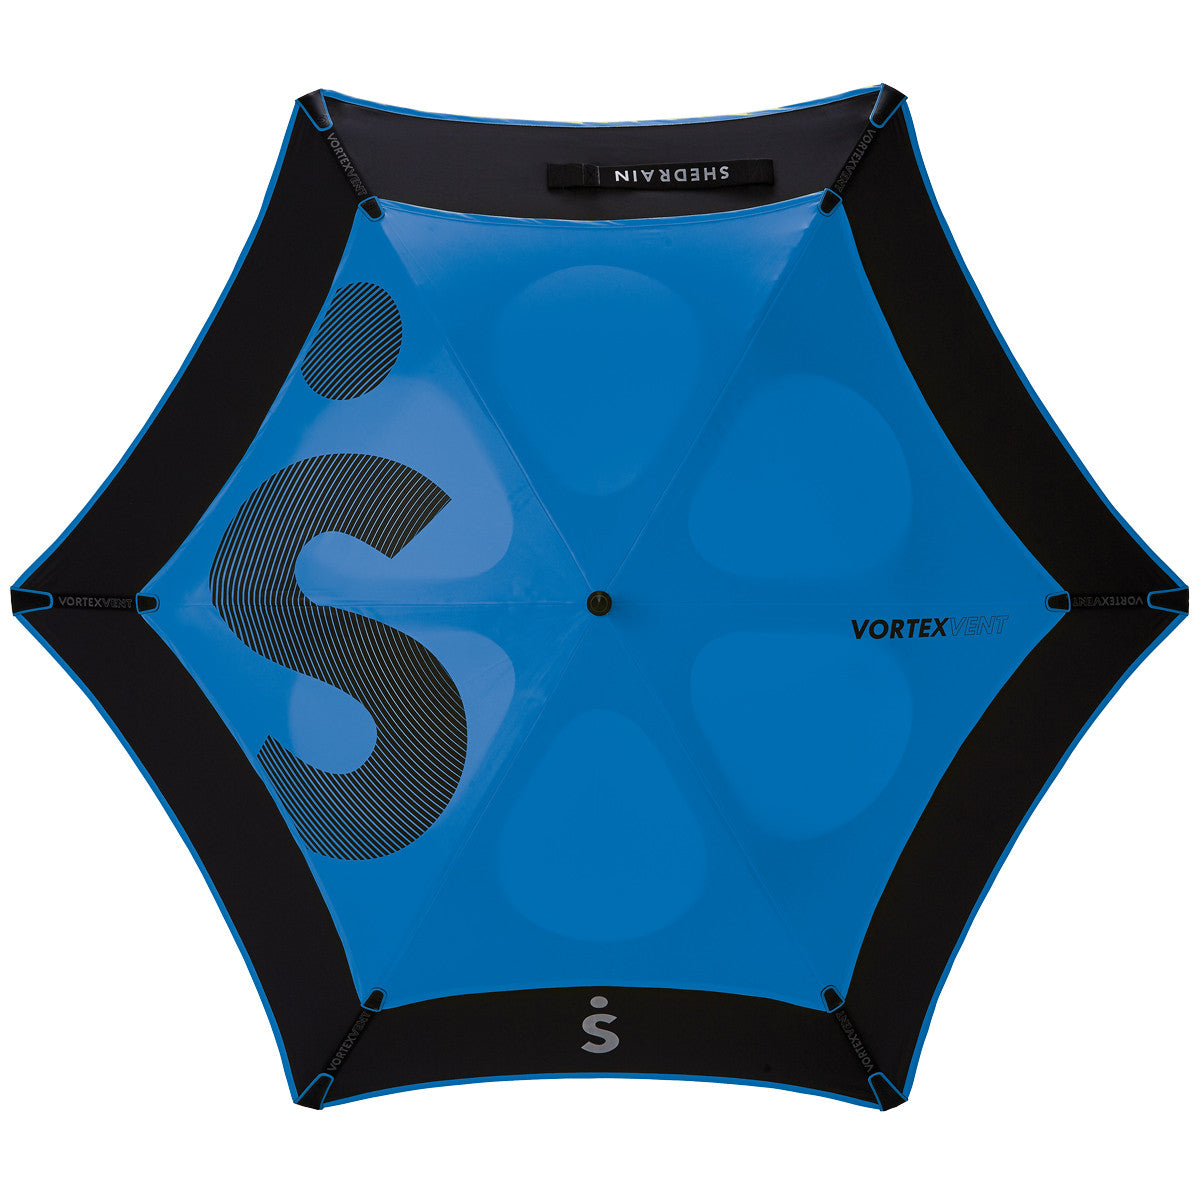 bright blue and black vented double canopy wind-resistant three person Vortex Vent golf umbrella with fiberglass frame and rubber grip, viewed from above with very large letter S dot logo